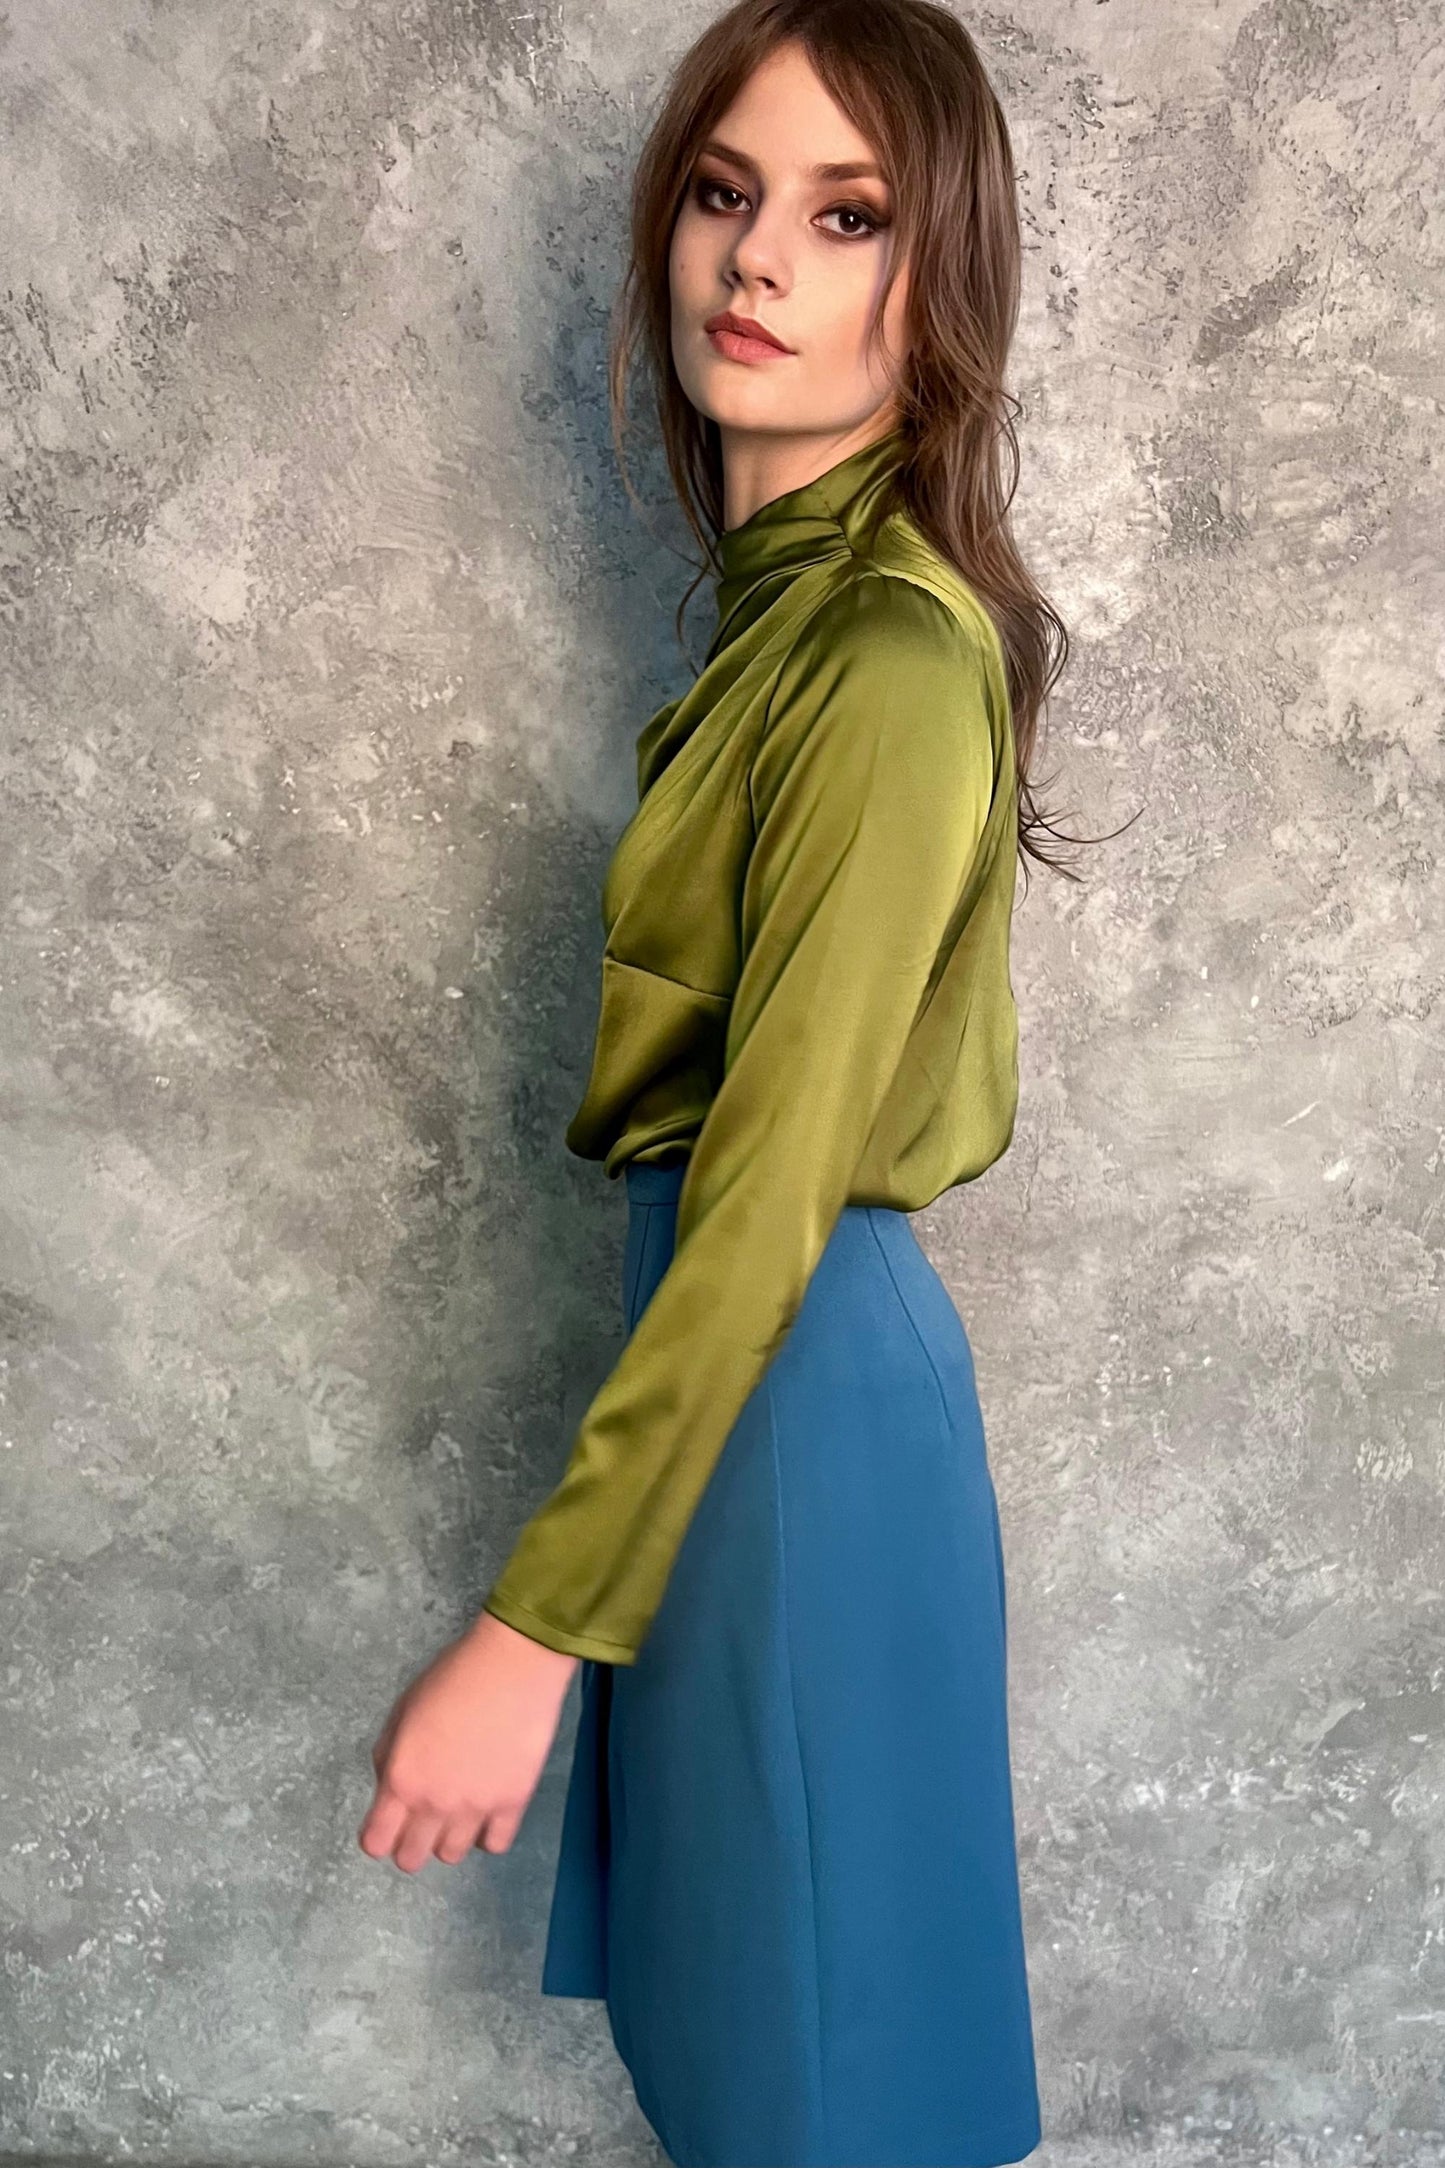 Pesto blouse with pleats on shoulder